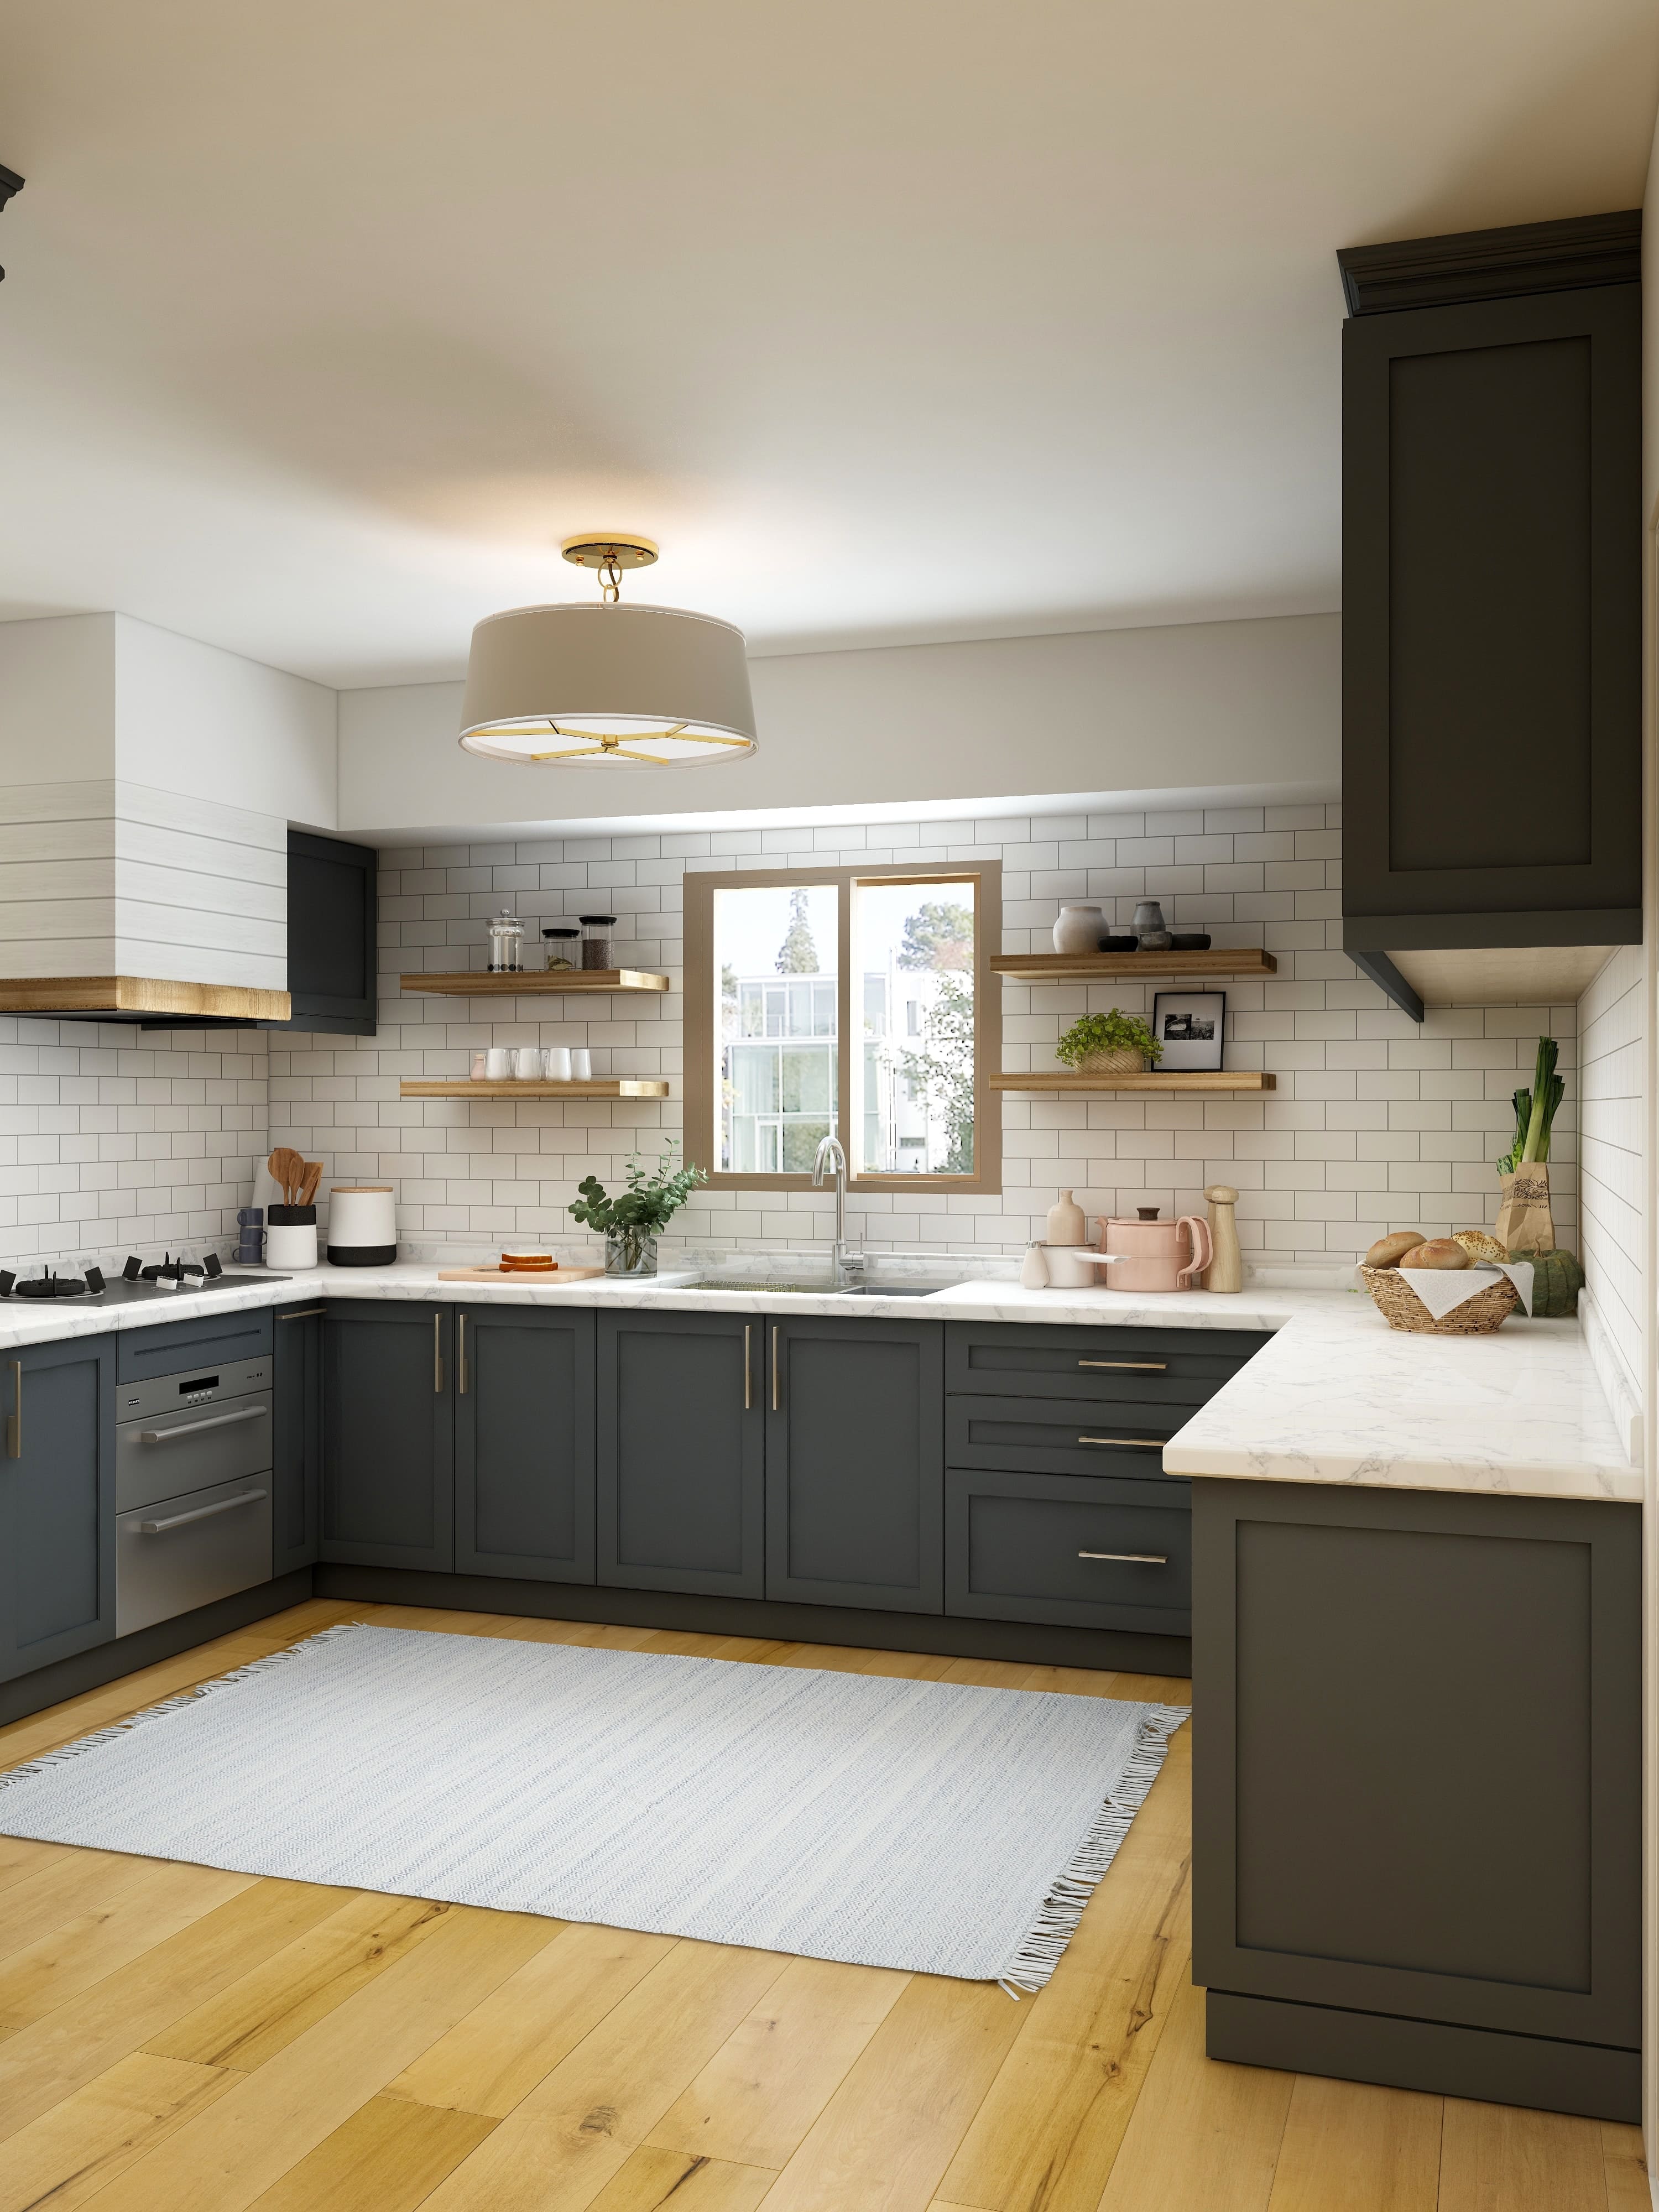 gray kitchen cabinetry with white countertops and brown wood floors - photo by Unsplash